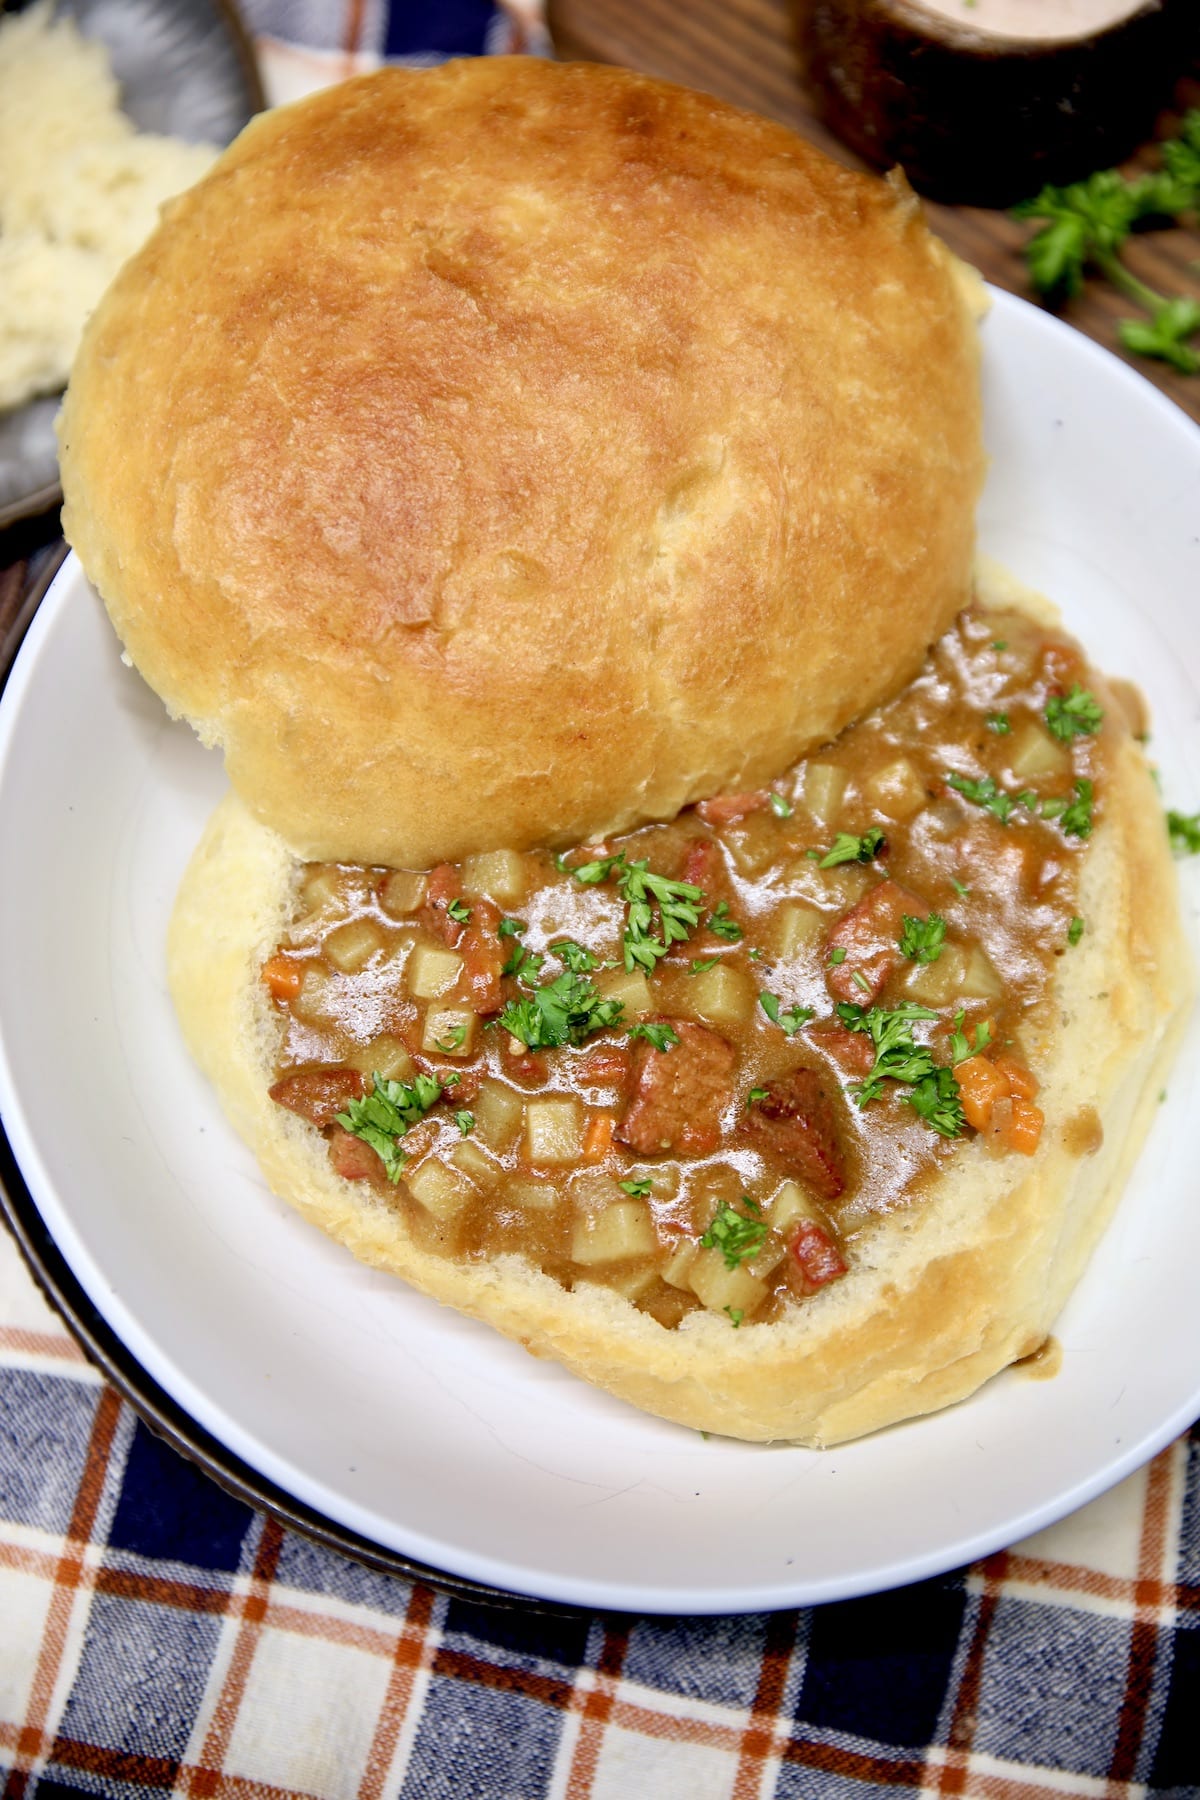 Bread bowl with beef stew.